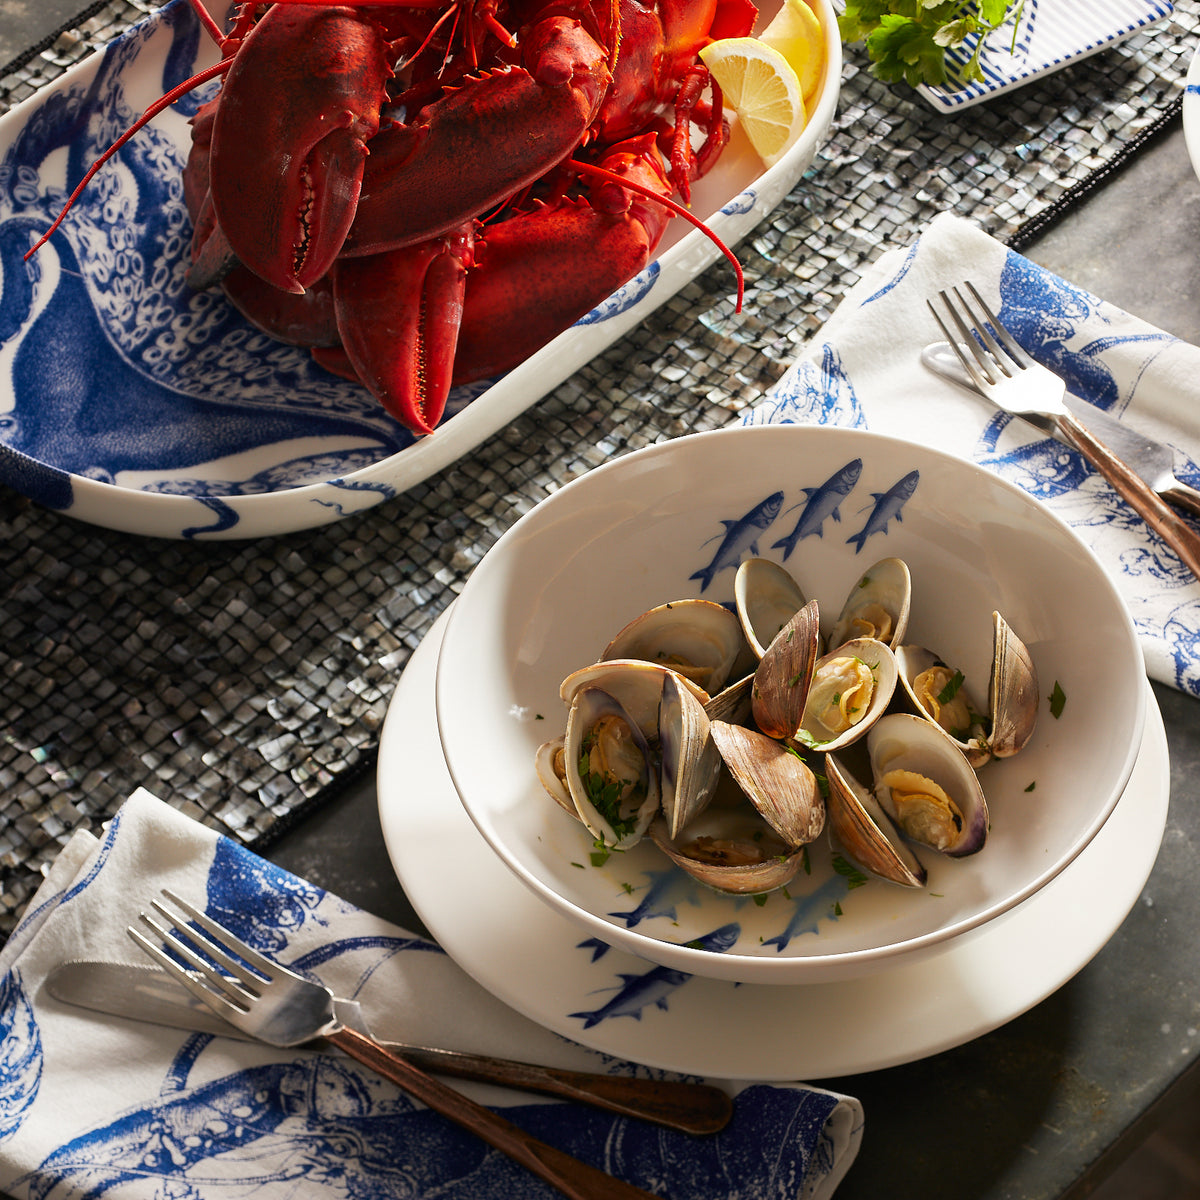 A bowl of clams garnished with herbs sits on a plate next to a dish containing a whole cooked lobster, both pieces from our elegant Caskata Artisanal Home dinnerware collection. Two forks rest on folded napkins beside the plates, ready to make your dining experience delightful.